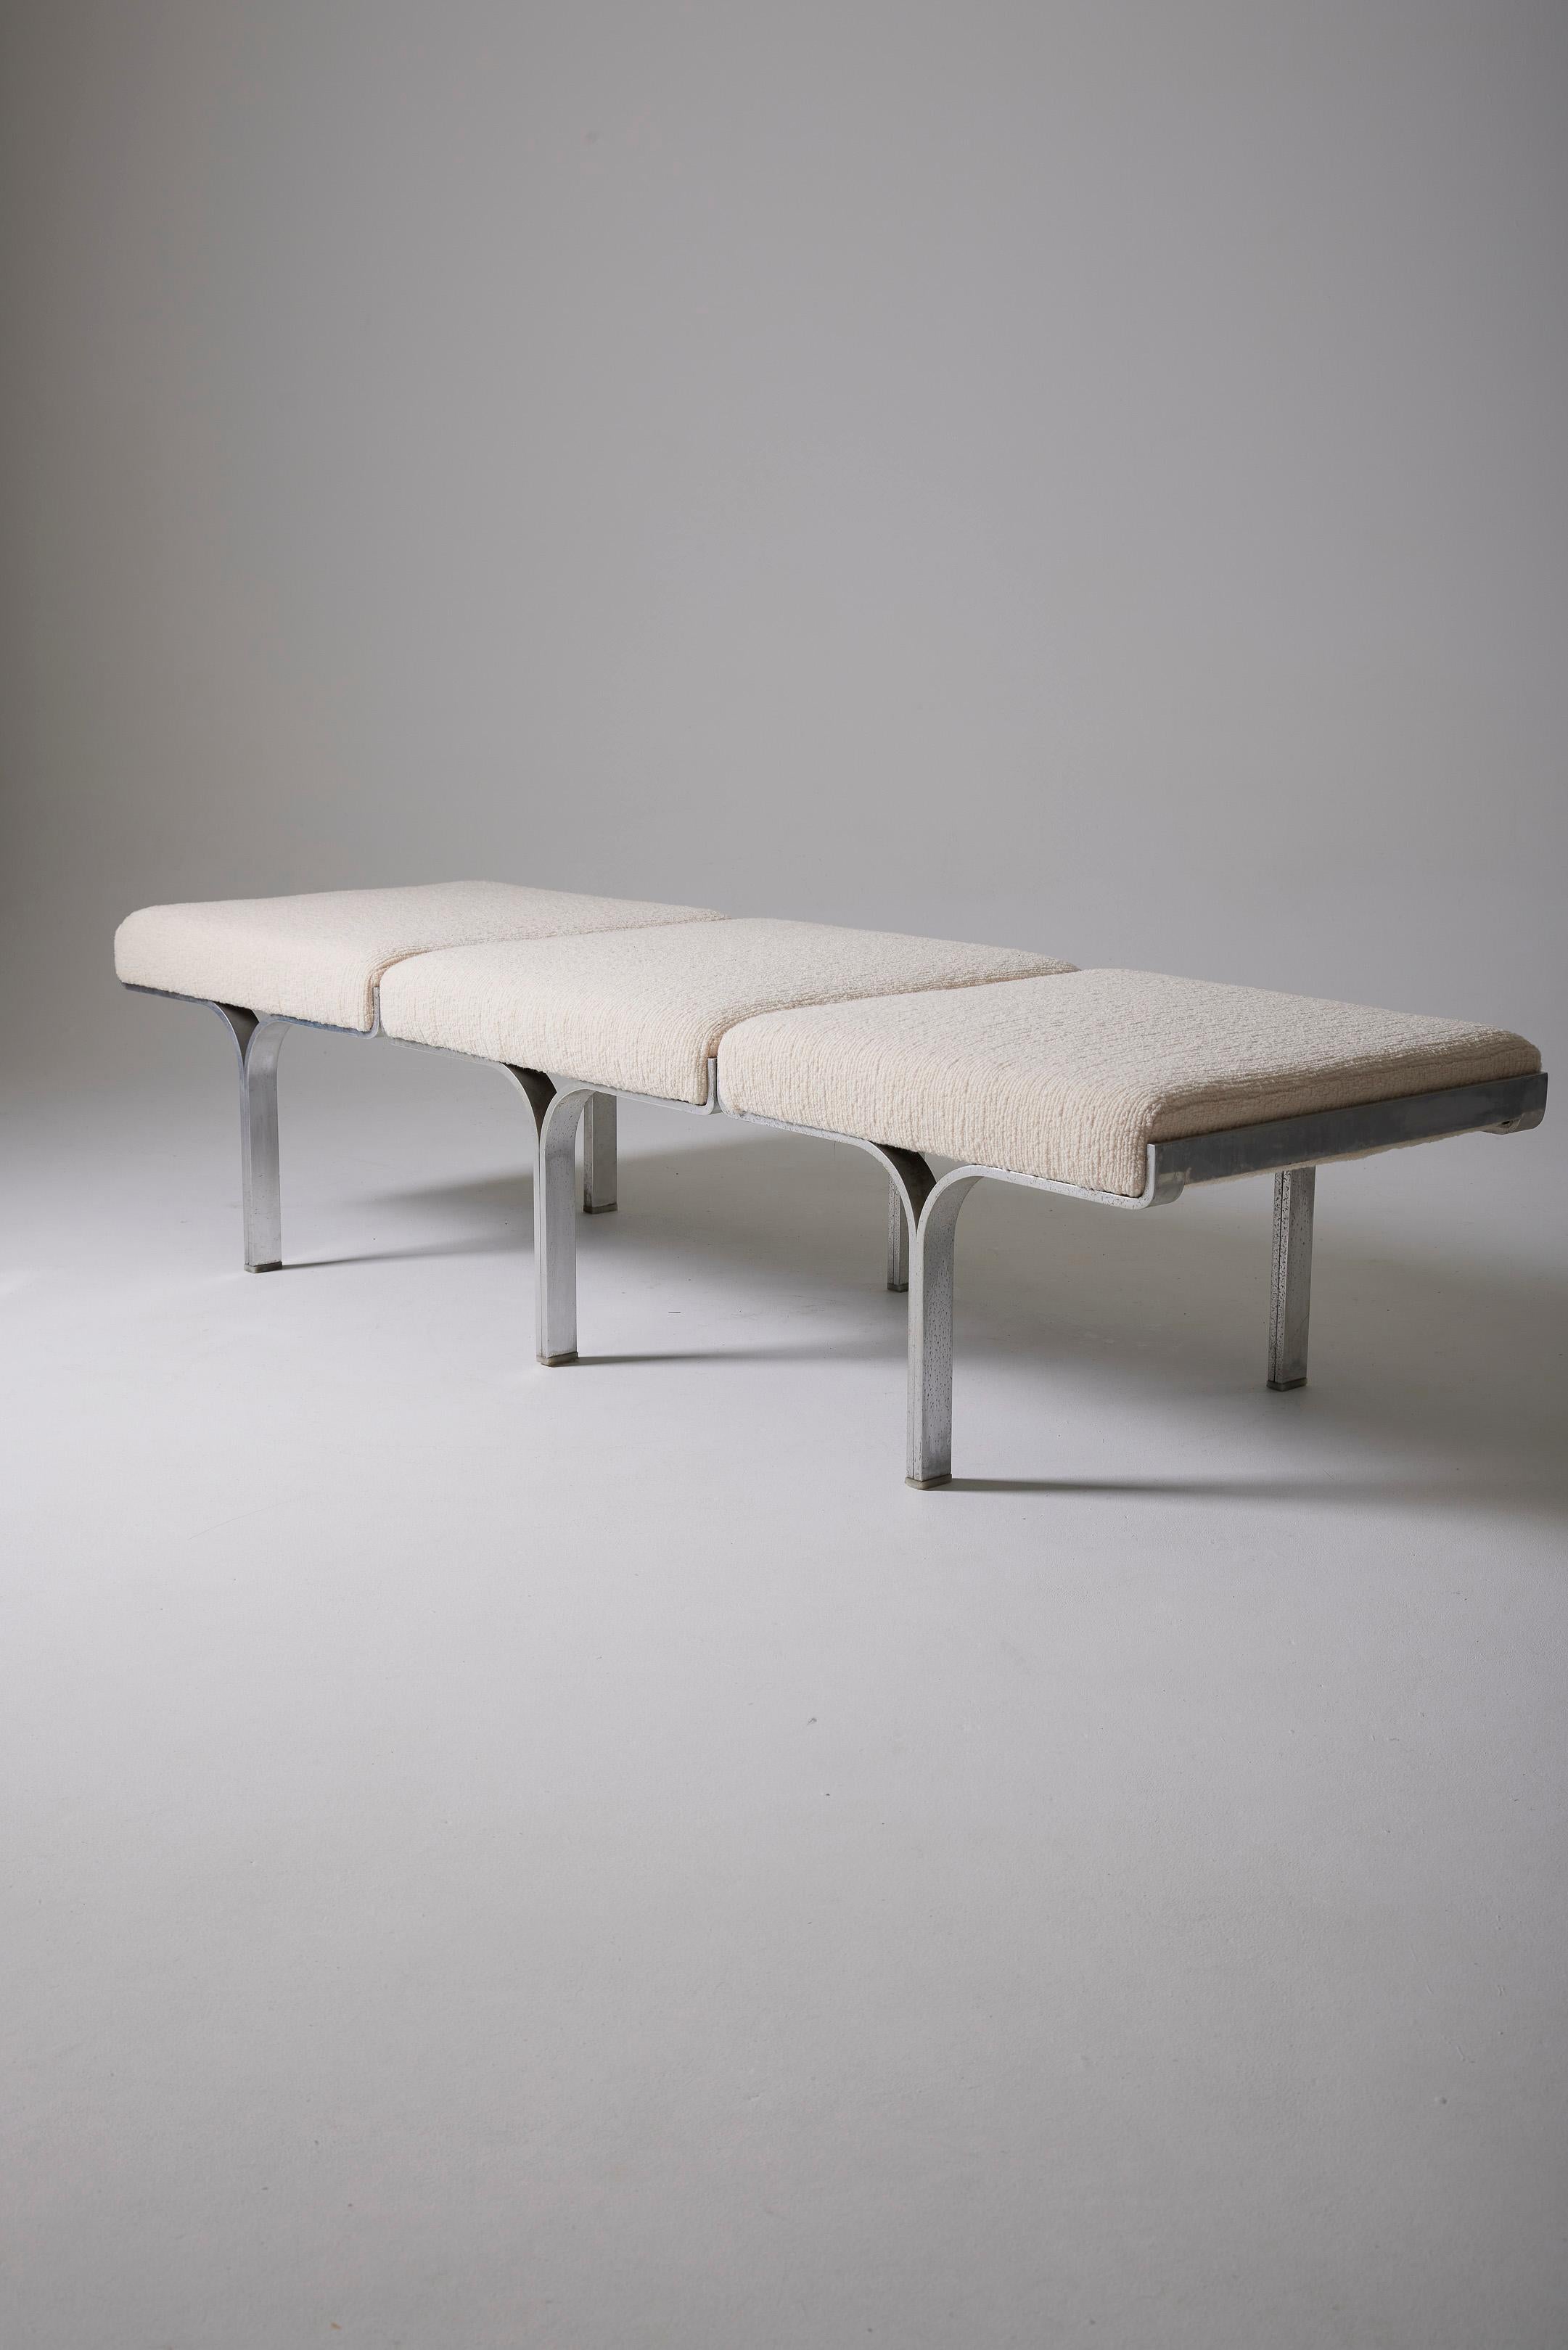 3-seater bench, 'Link Bench' model or 'Model 656,' by American designer John Behringer (1939-), from the 1960s (1961). The base is made of steel, and the seat has been reupholstered with high-quality off-white fabric. Herman Miller label underneath.